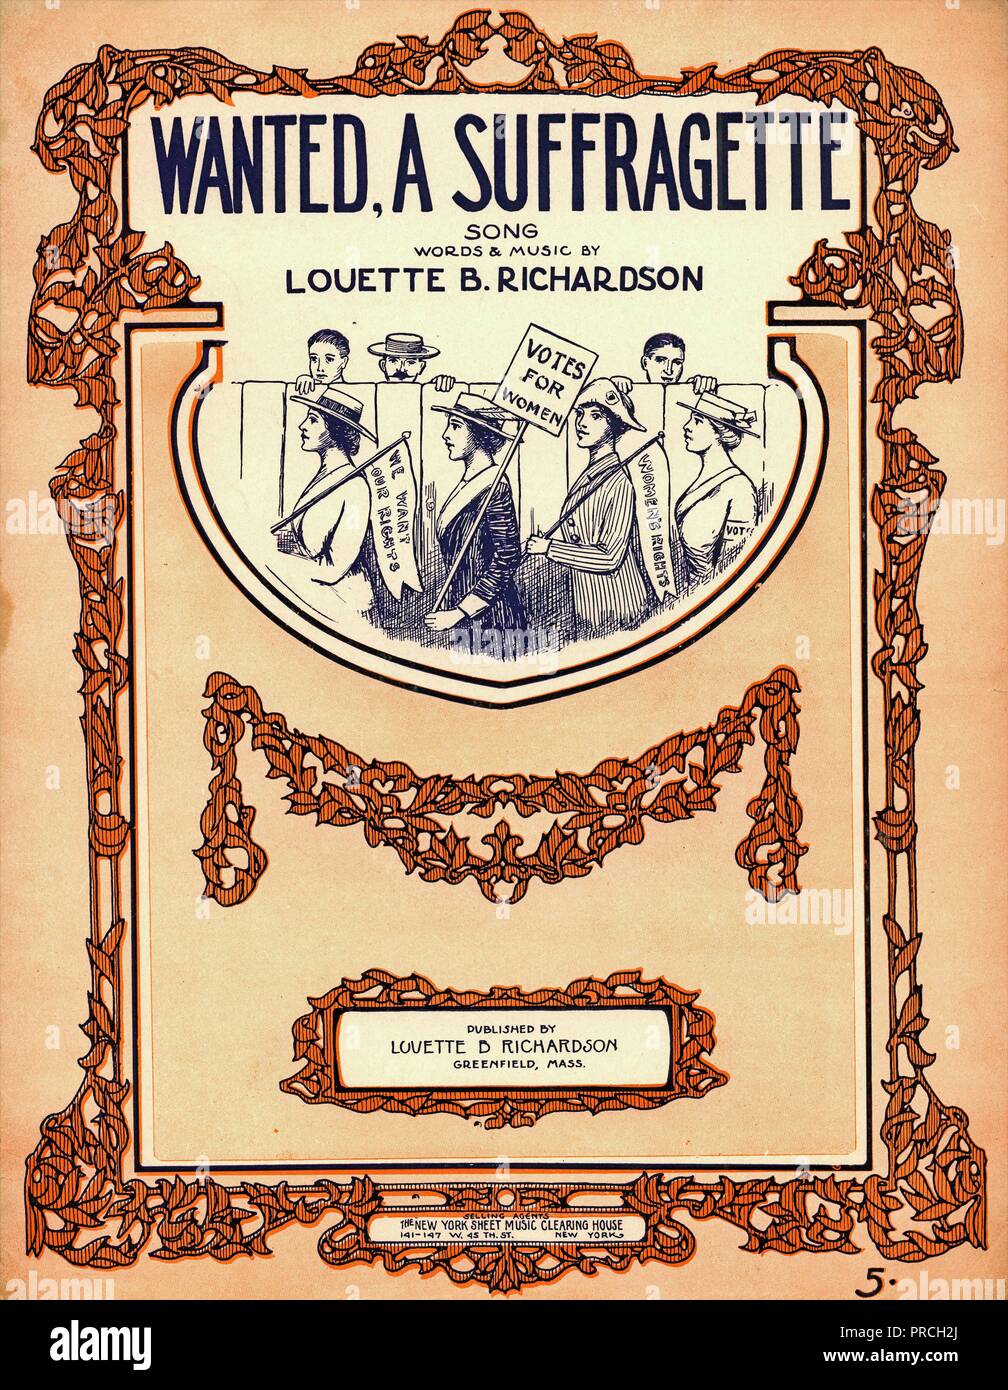 Sheet music cover for Louette B Richardson's 'Wanted, A Suffragette,' with an illustration of men peering over a fence at female suffragists who are demonstrating with signs, one with the text 'Votes For Women,' published in Greenfield, Massachusetts, by Louette B Richardson, for the American market, 1900. () Stock Photo